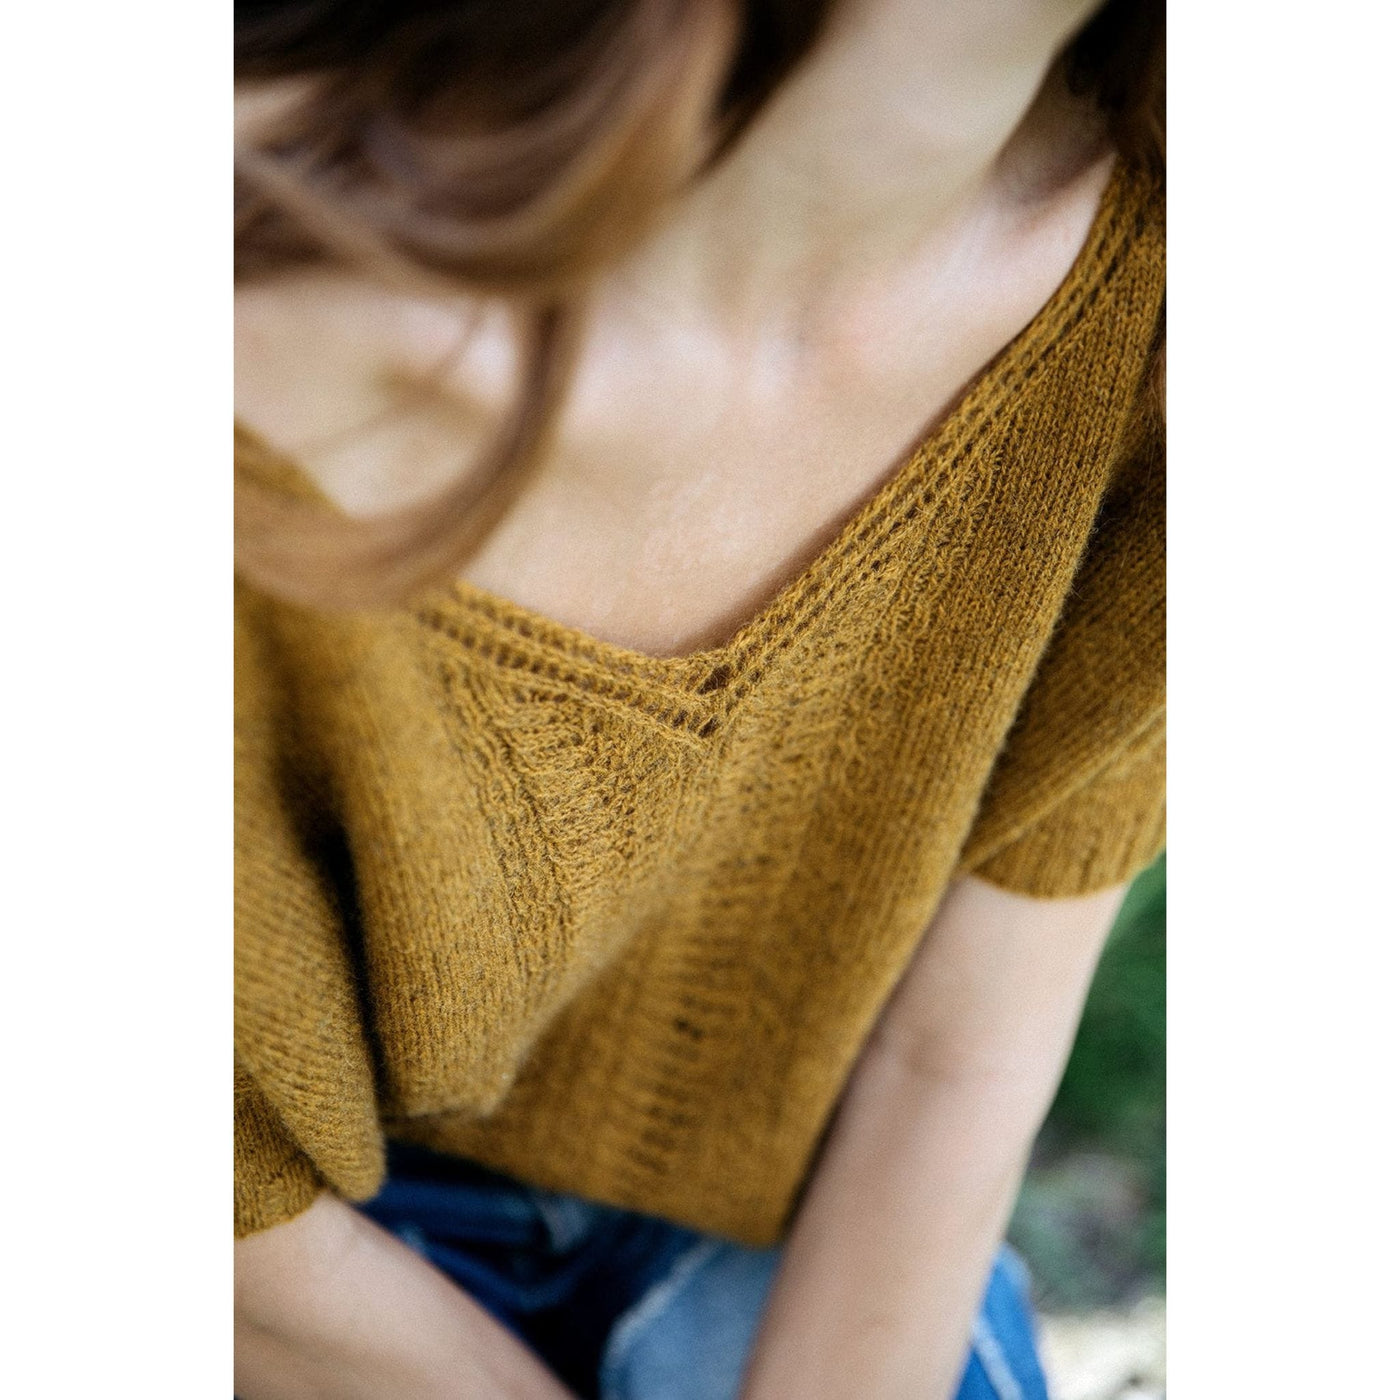 Inside Laine Magazine Issue 15 Autumn 2022 aerial view of woman wearing off yellow/gold short sleeve sweater.